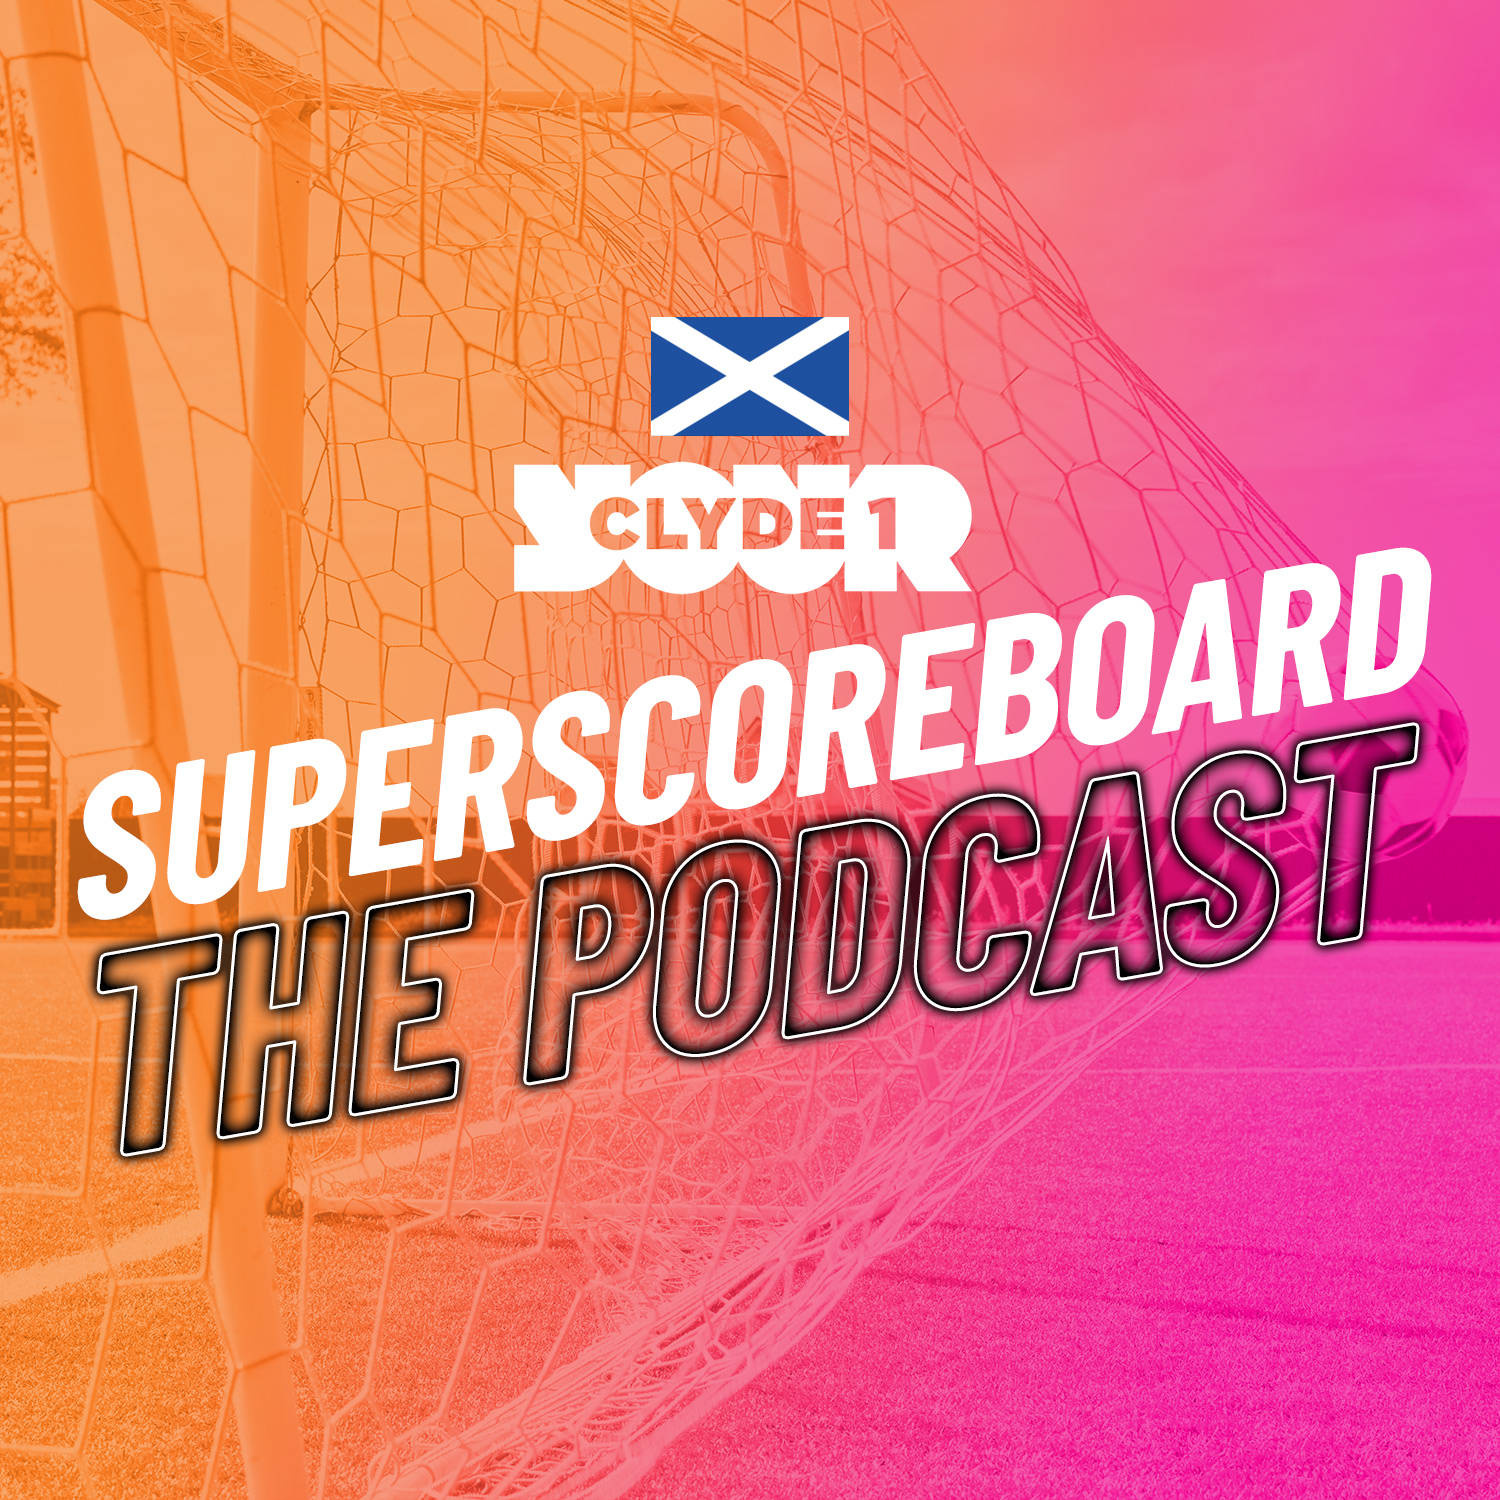 Monday 8th January Clyde 1 Superscoreboard